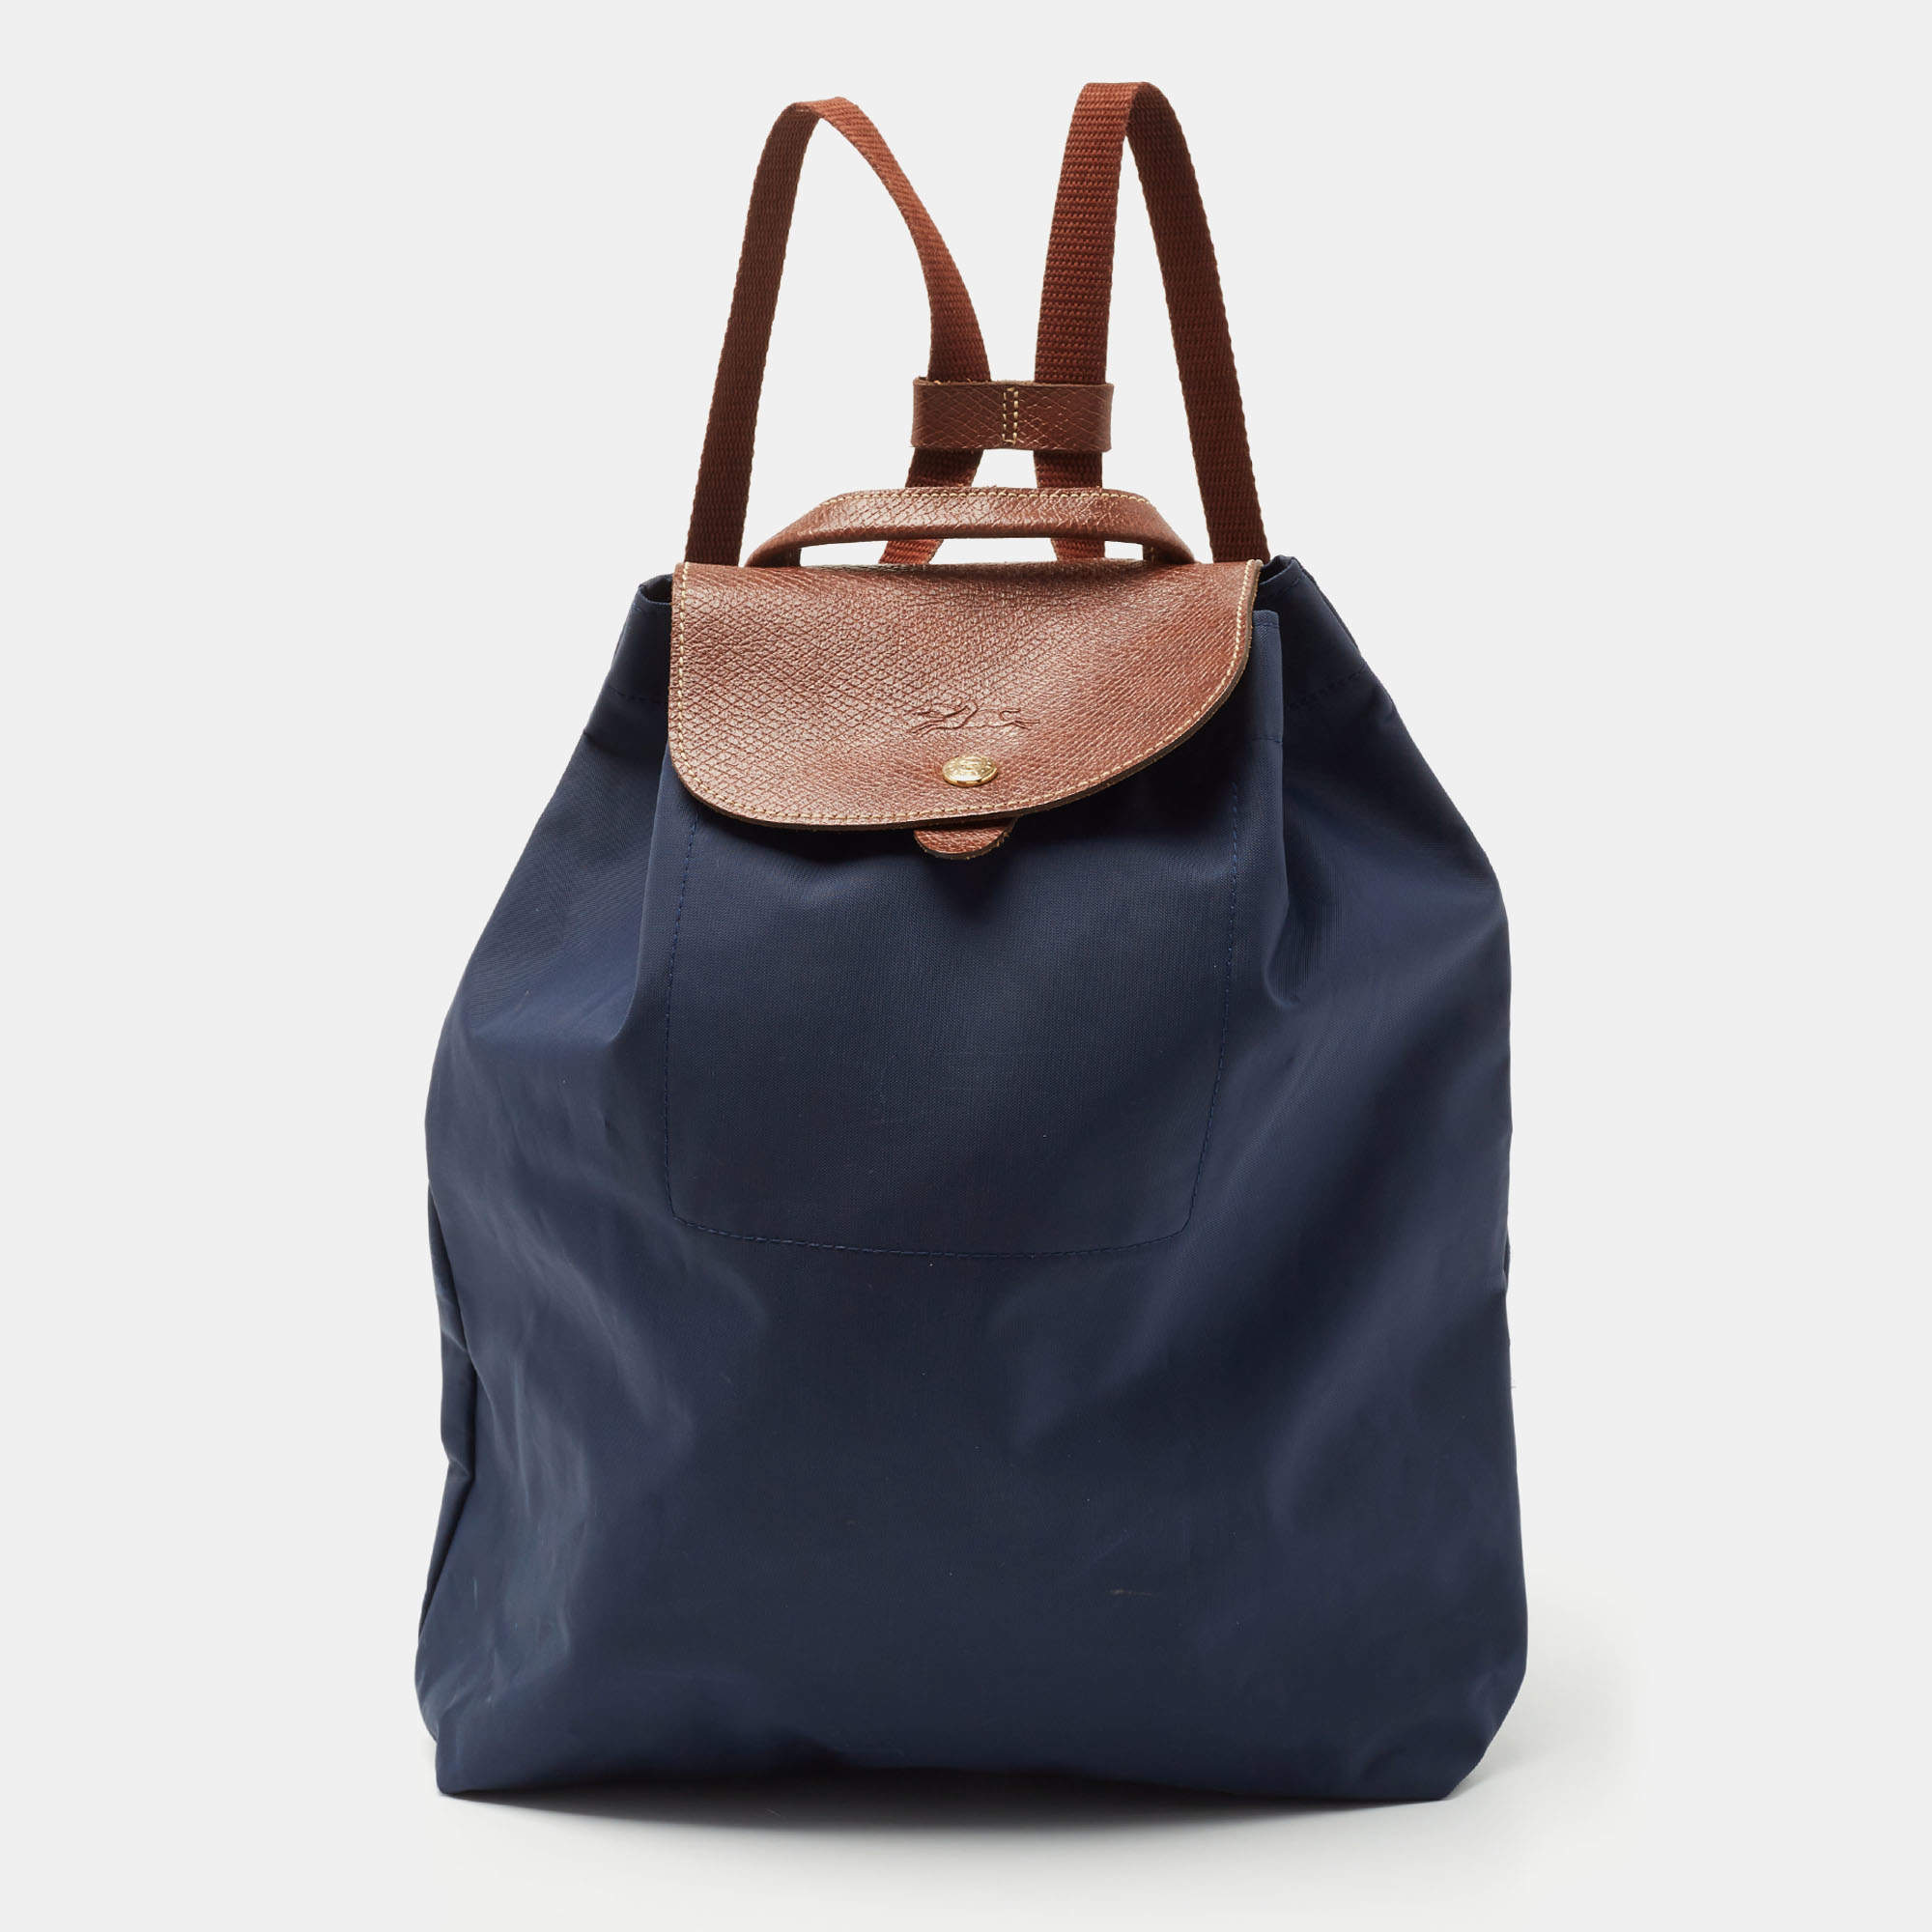 Longchamp Mini Le Pliage Cuir Leather Drawstring Backpack in Black